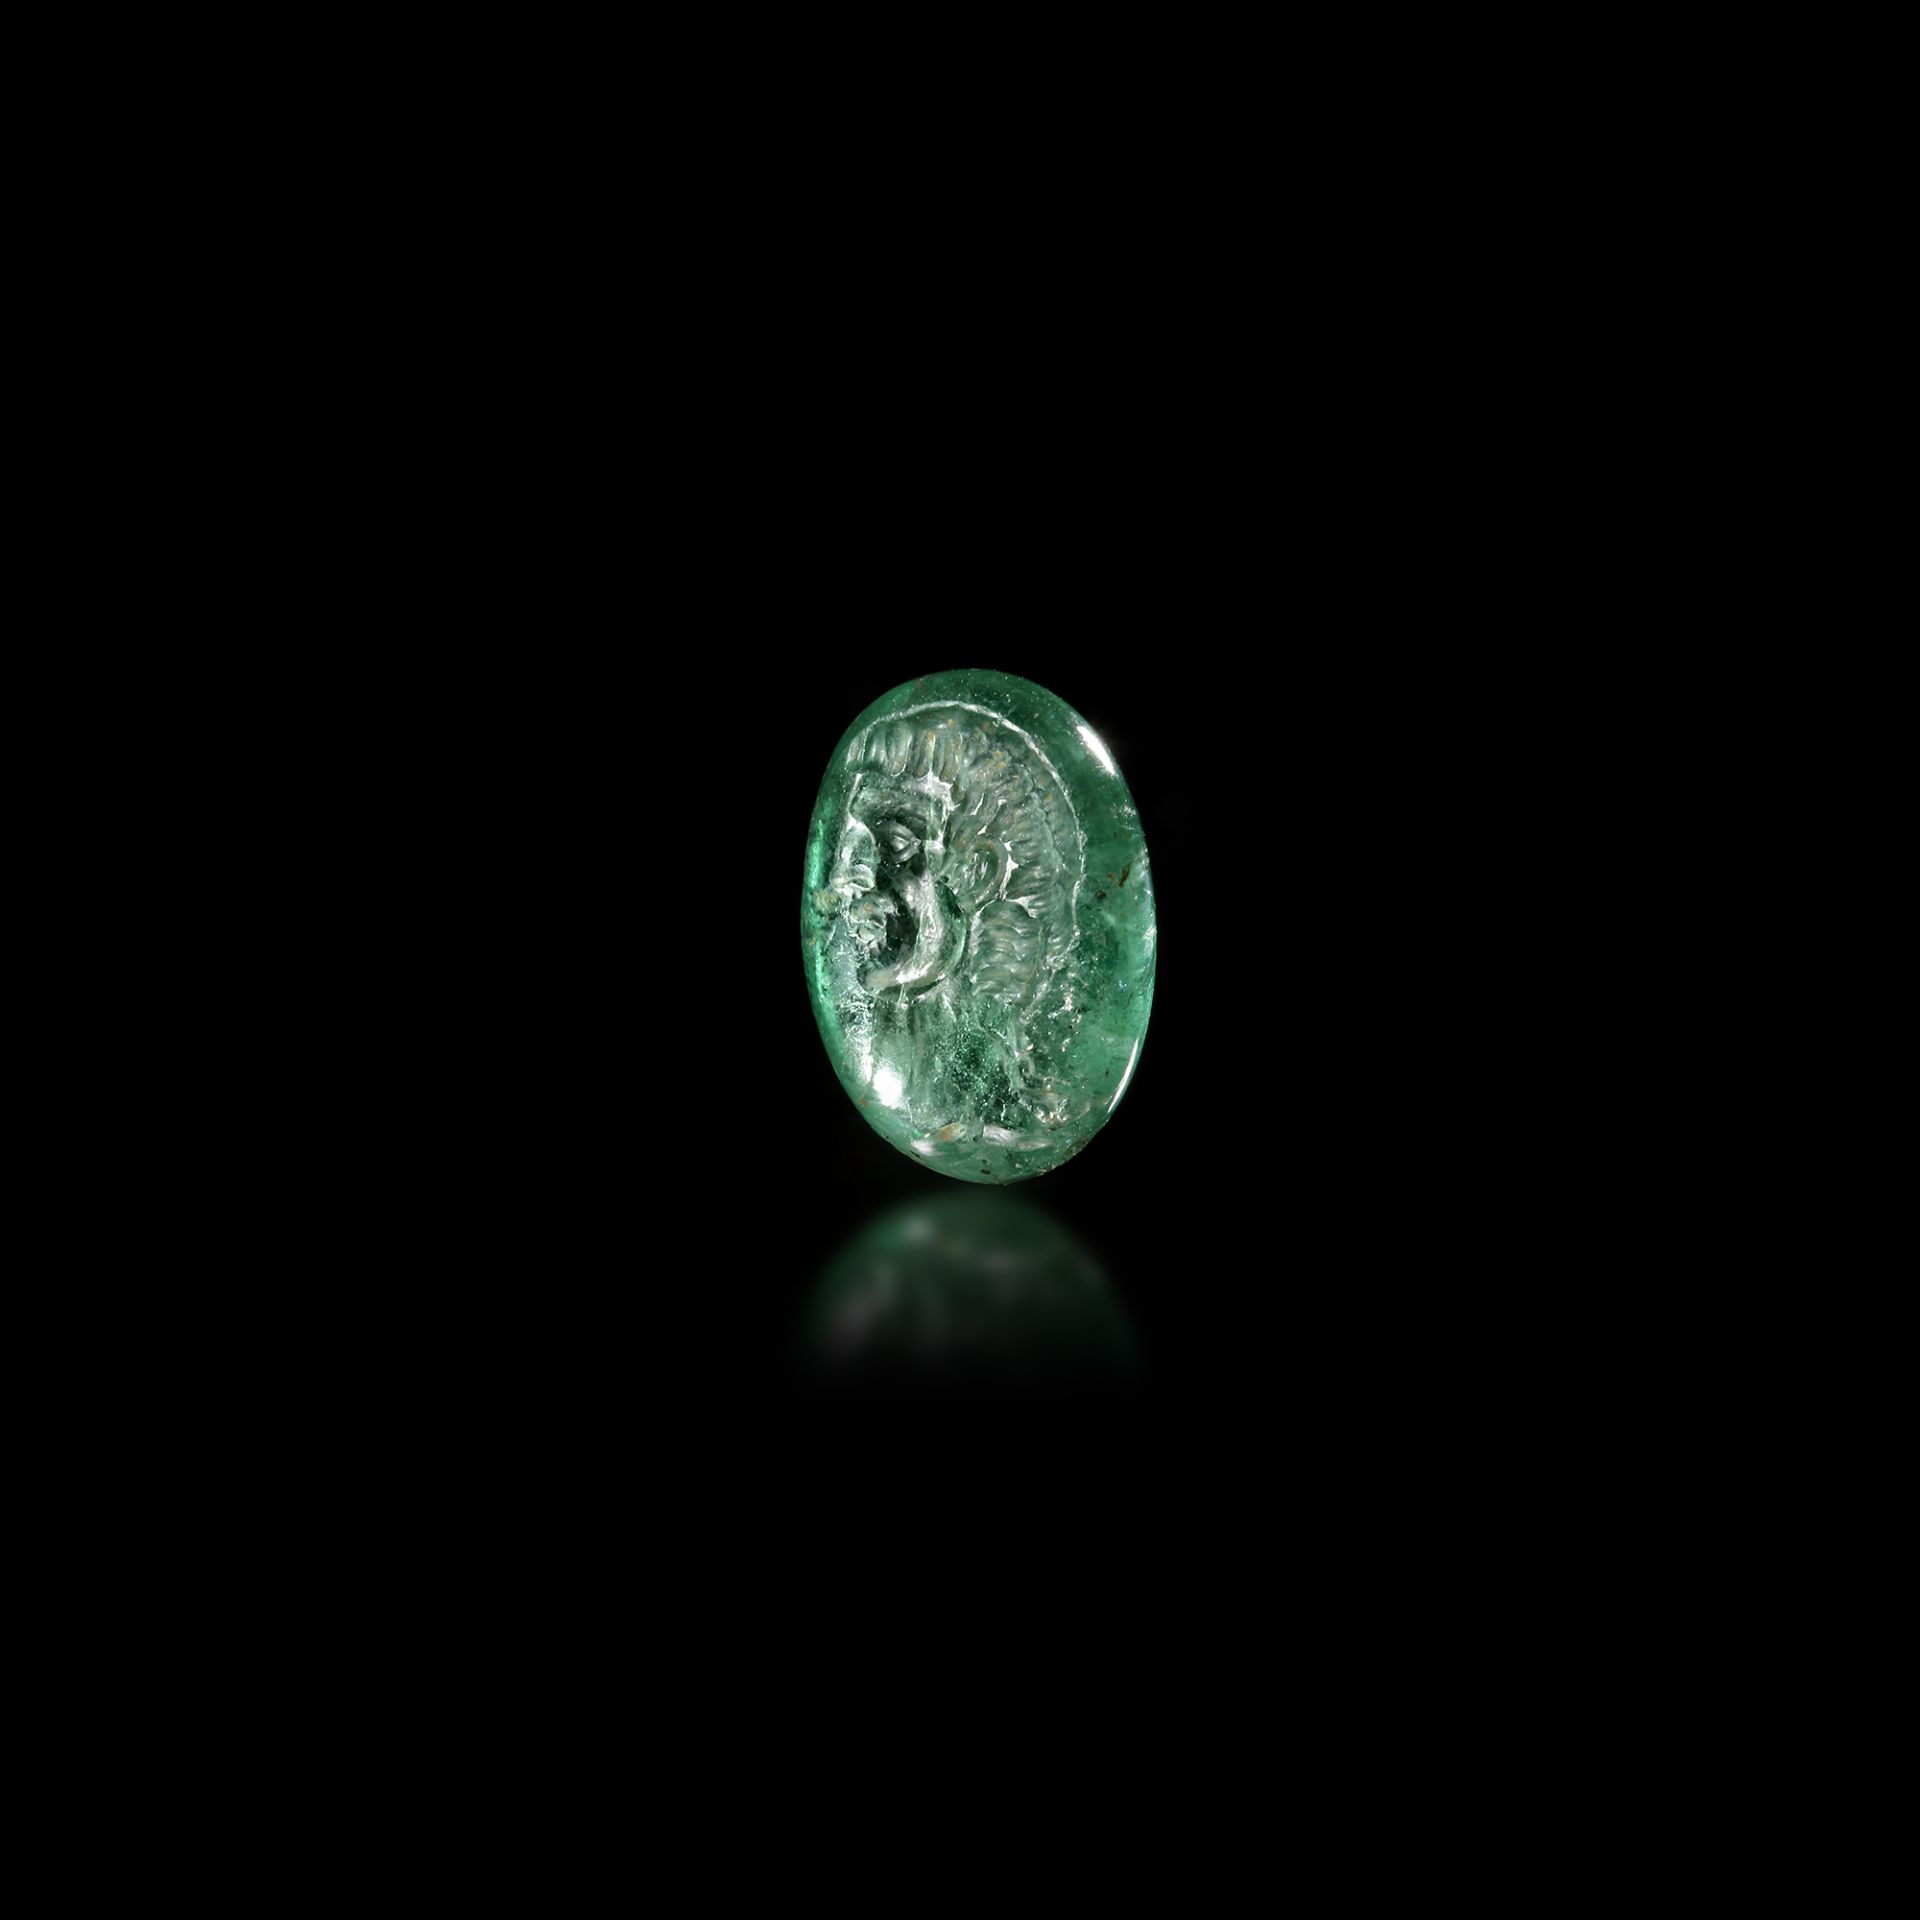 AN EMERALD INTAGLIO SHOWING THE BUST OF A MAN, 1ST CENTURY BC - Image 2 of 3